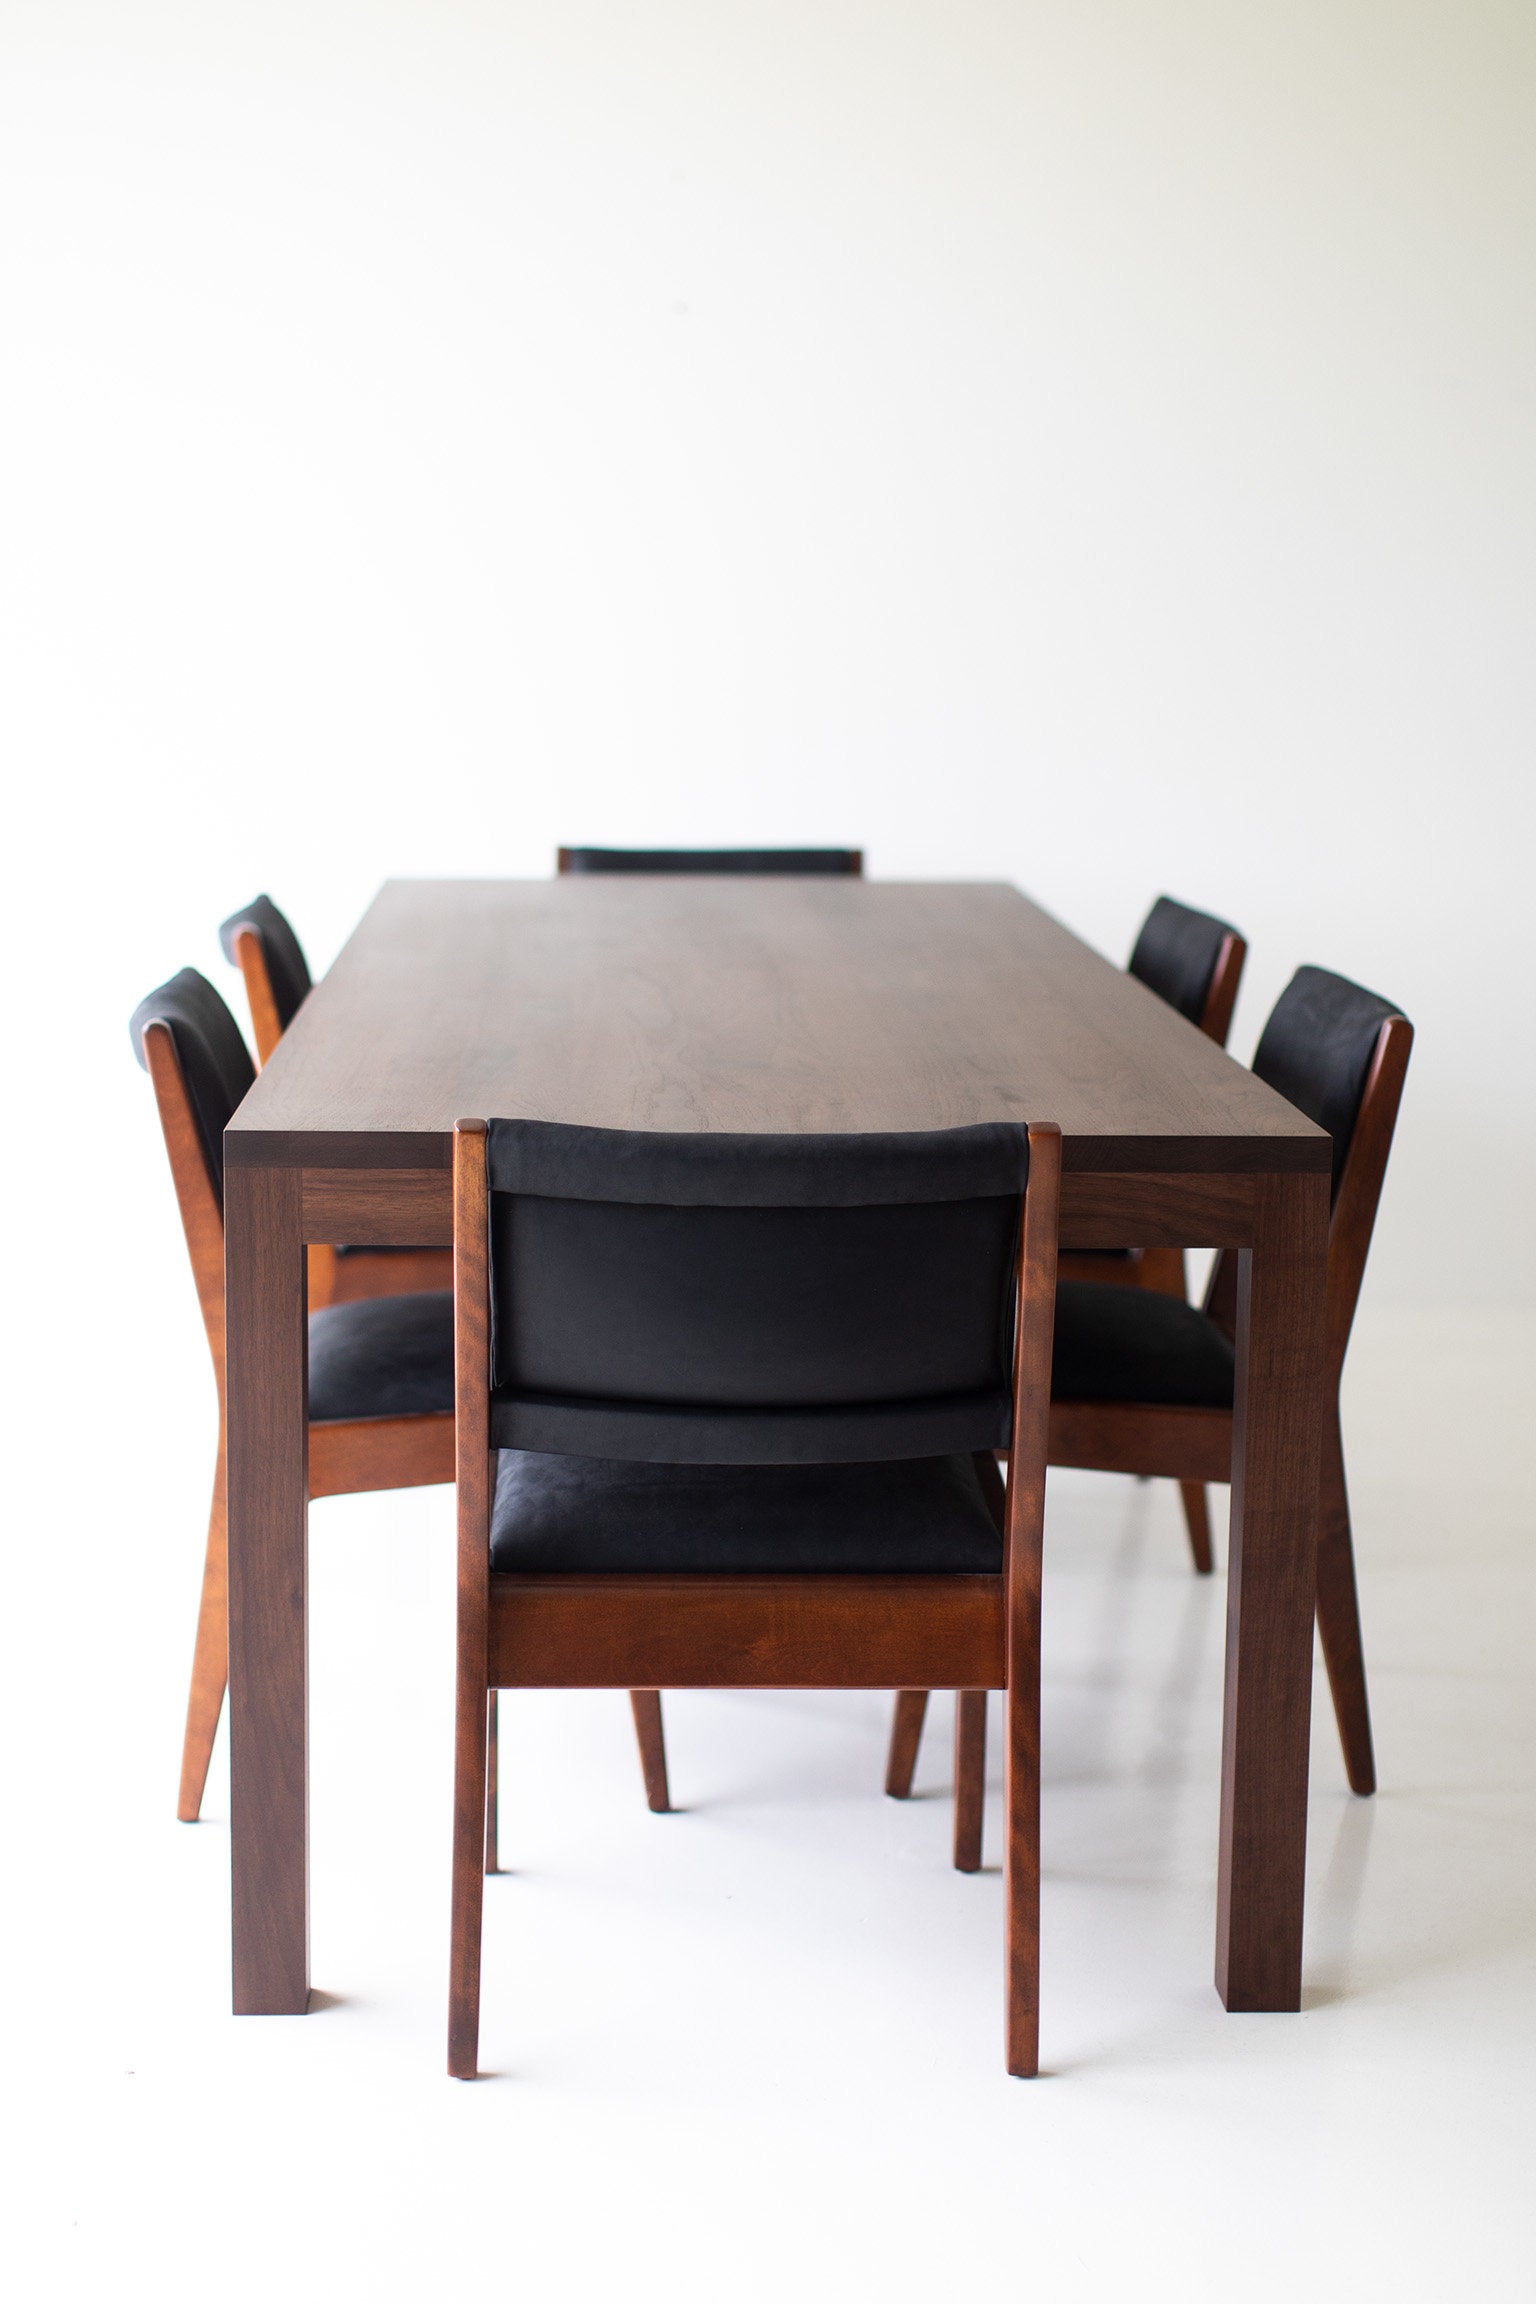 Modern Dining Table - 0918 - 